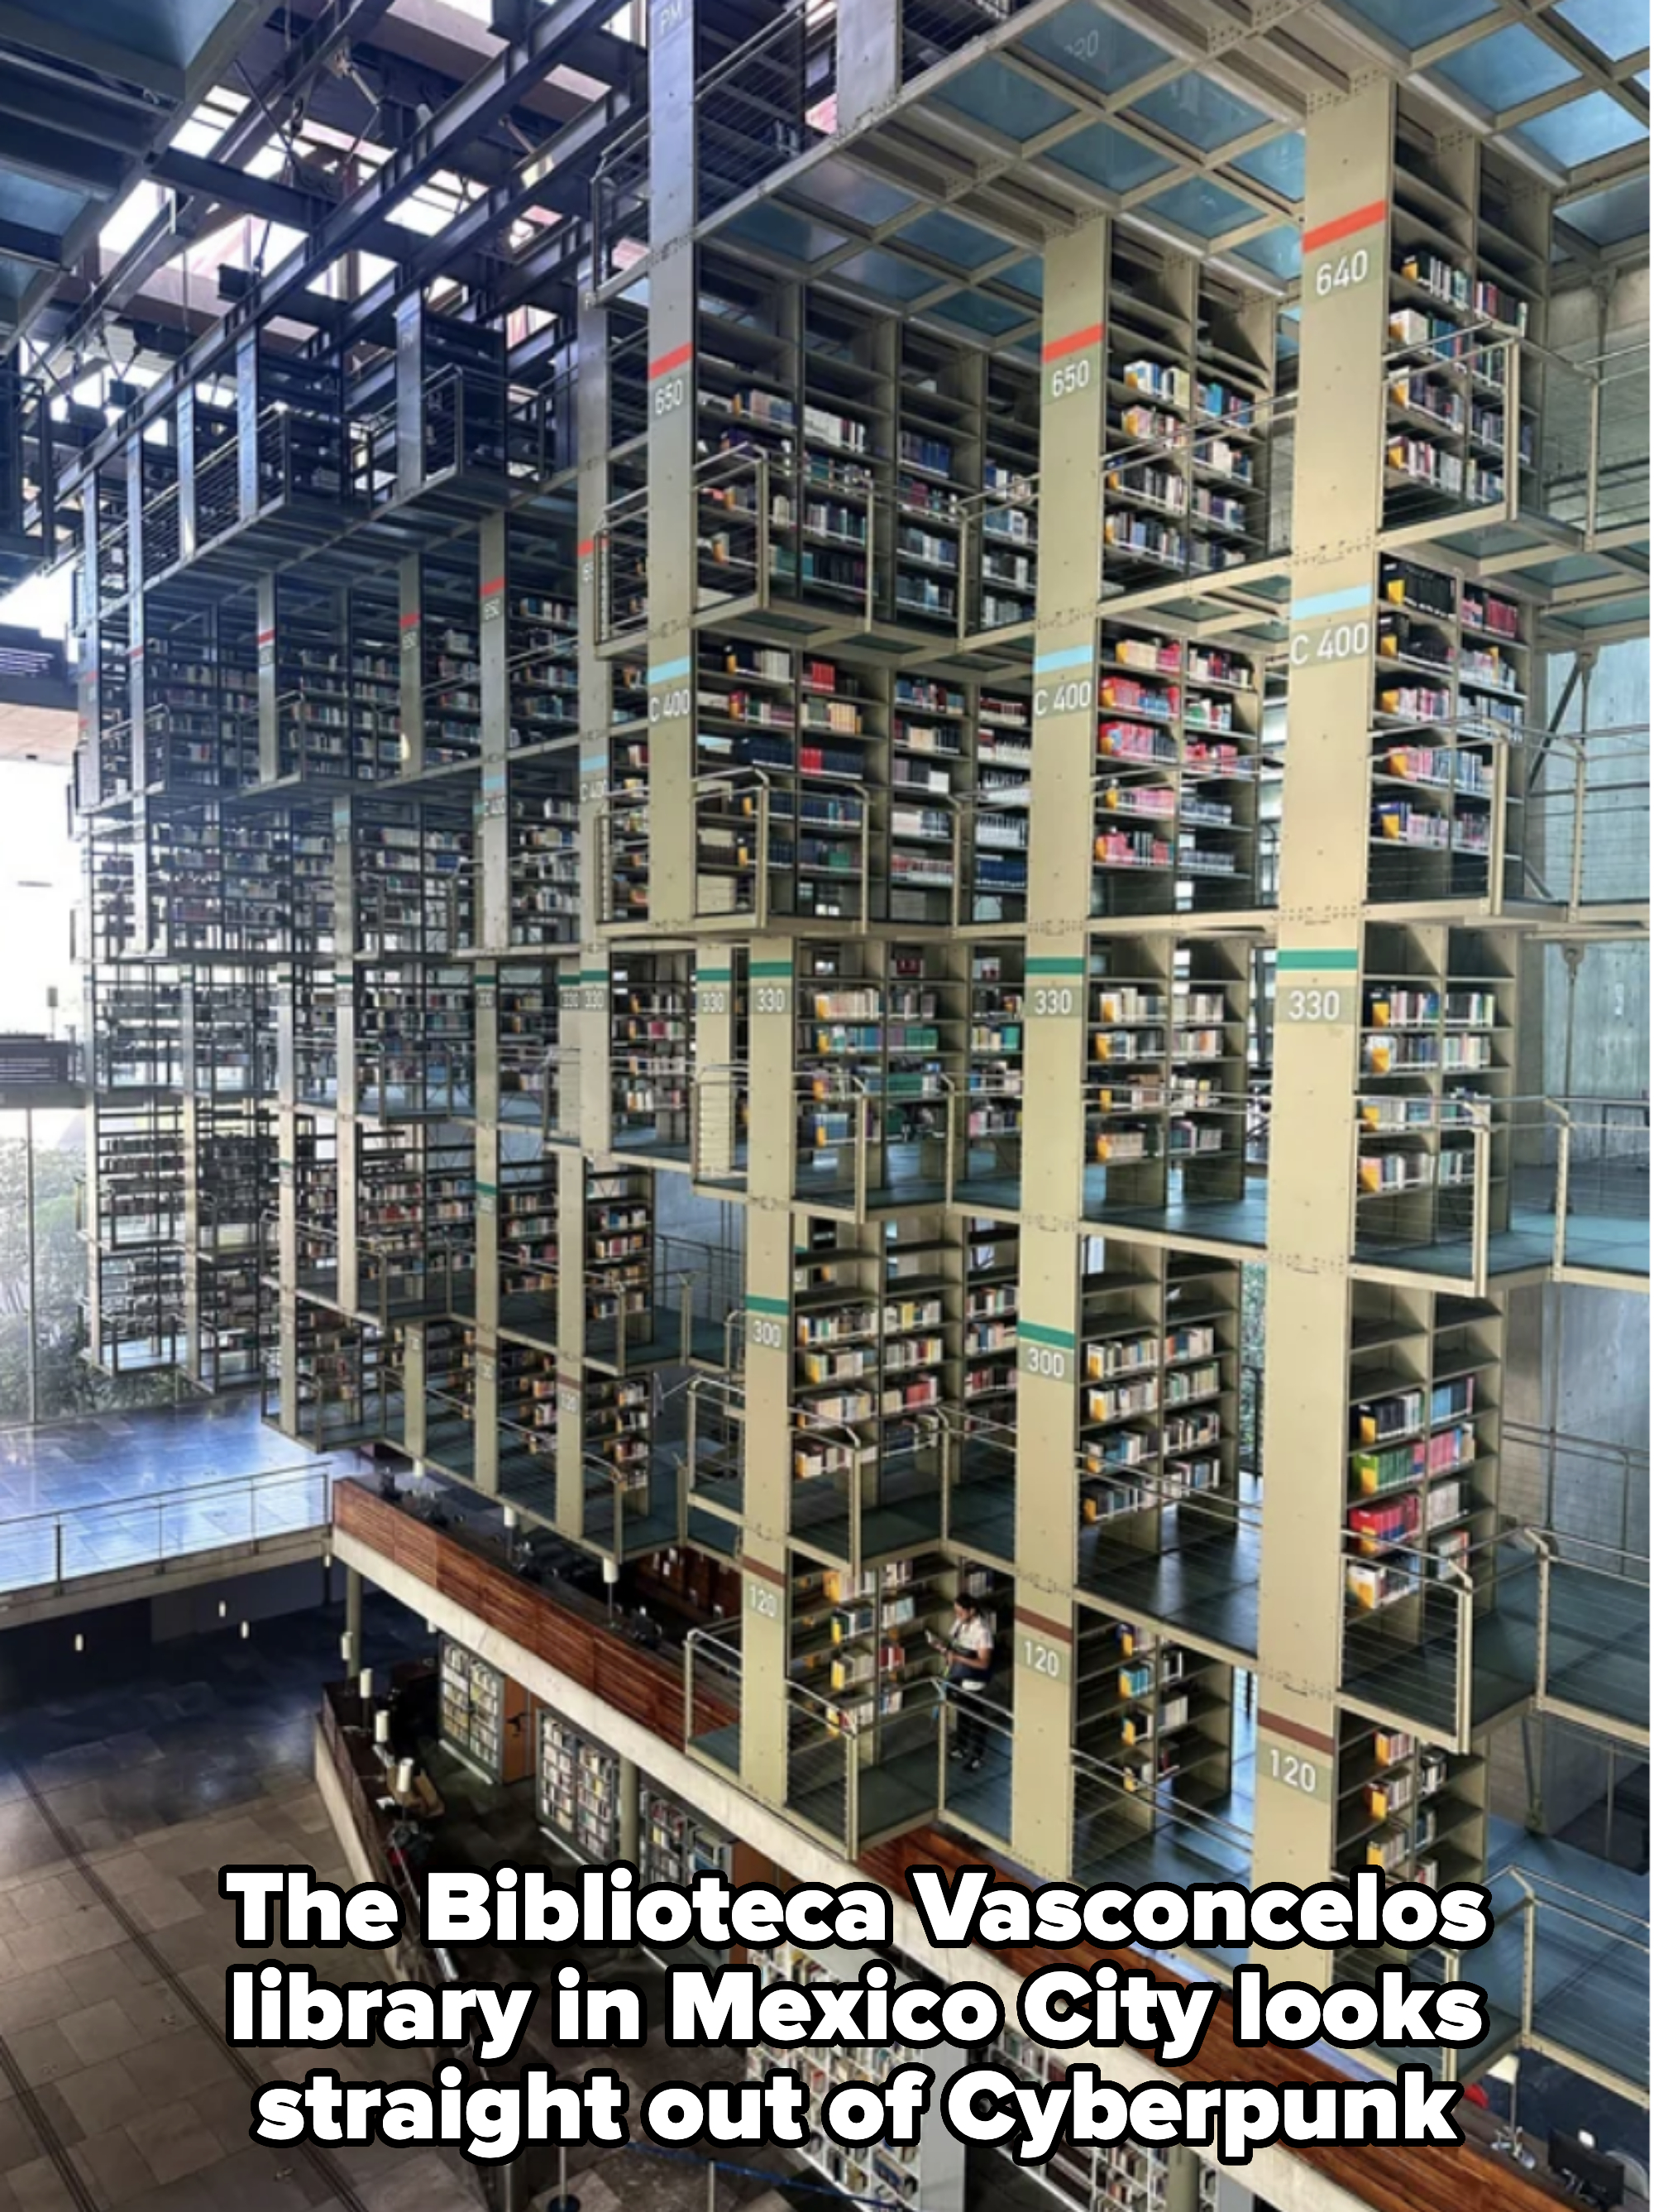 Multi-level library shelves filled with books, accessing walkways and labeled columns